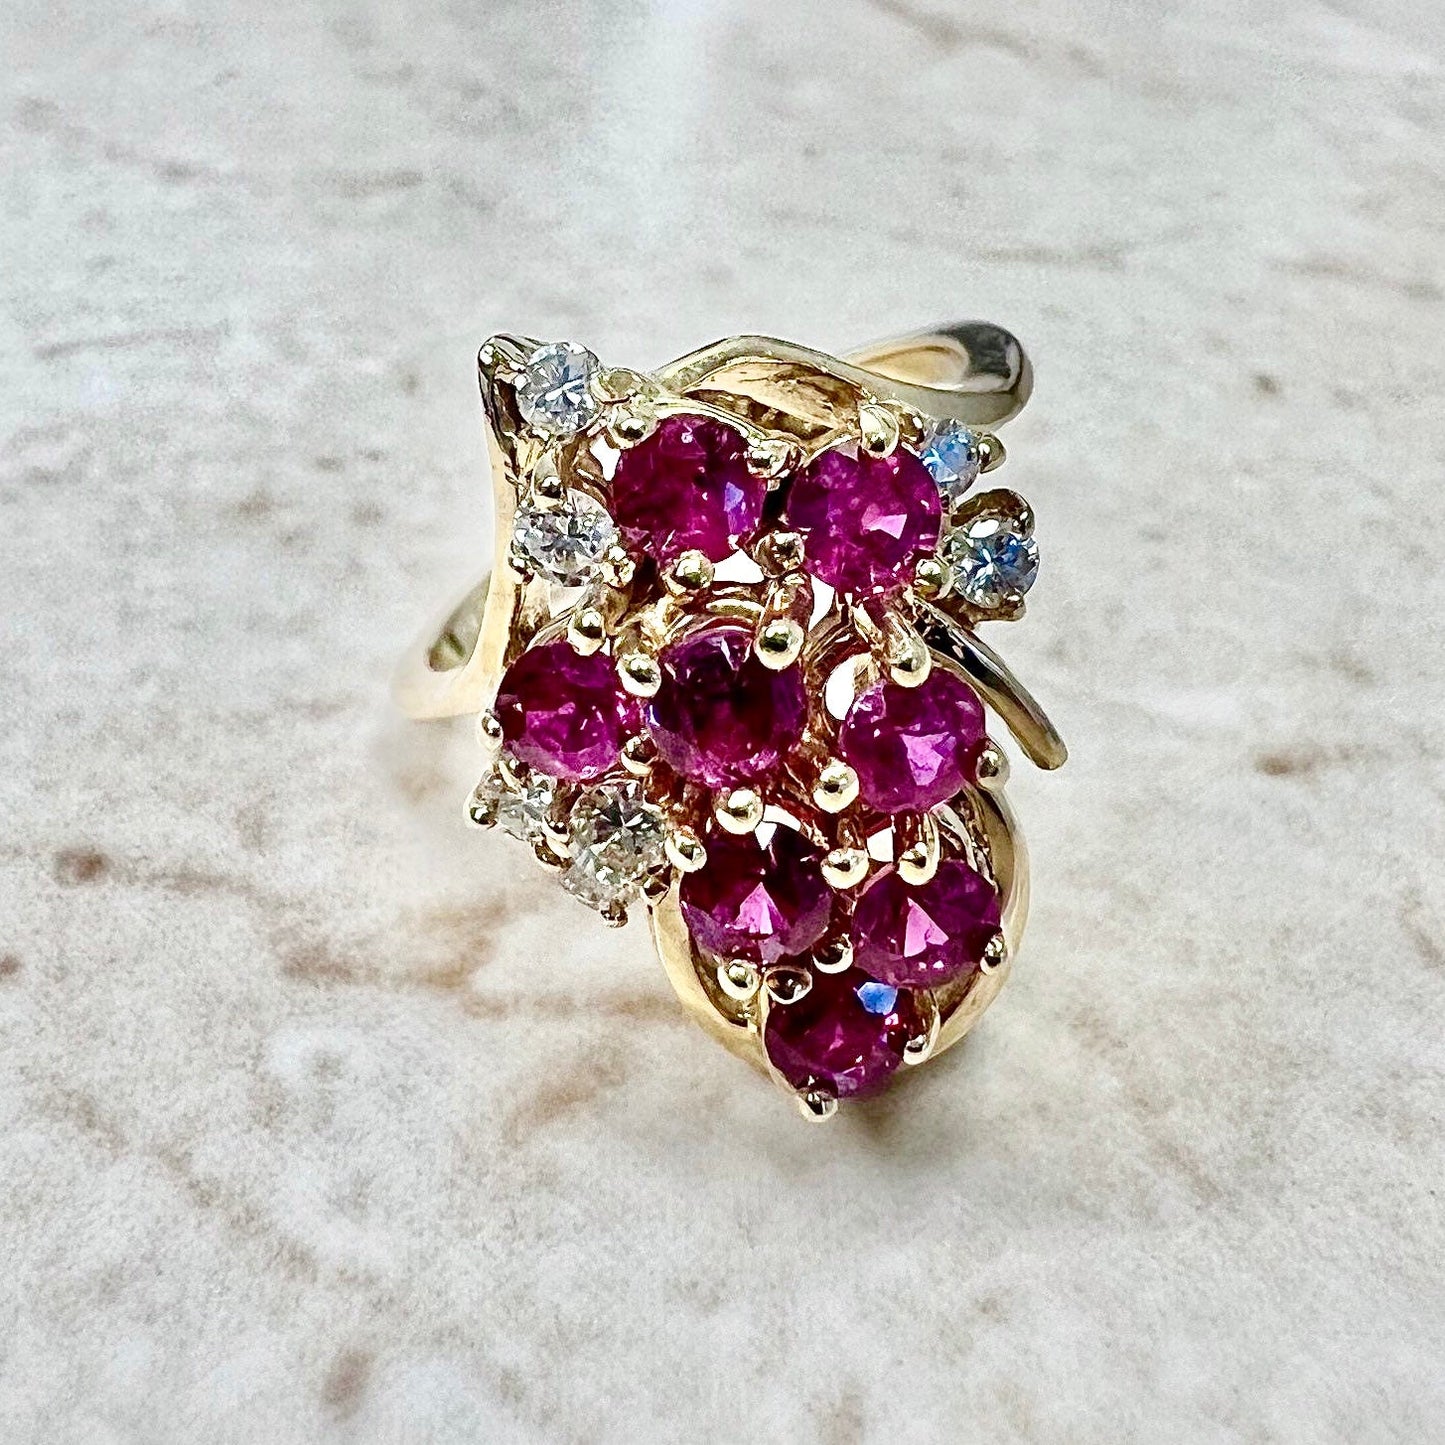 CLEARANCE 40% OFF - Vintage 14 Karat Yellow Gold Natural Ruby & Diamond Cocktail Ring